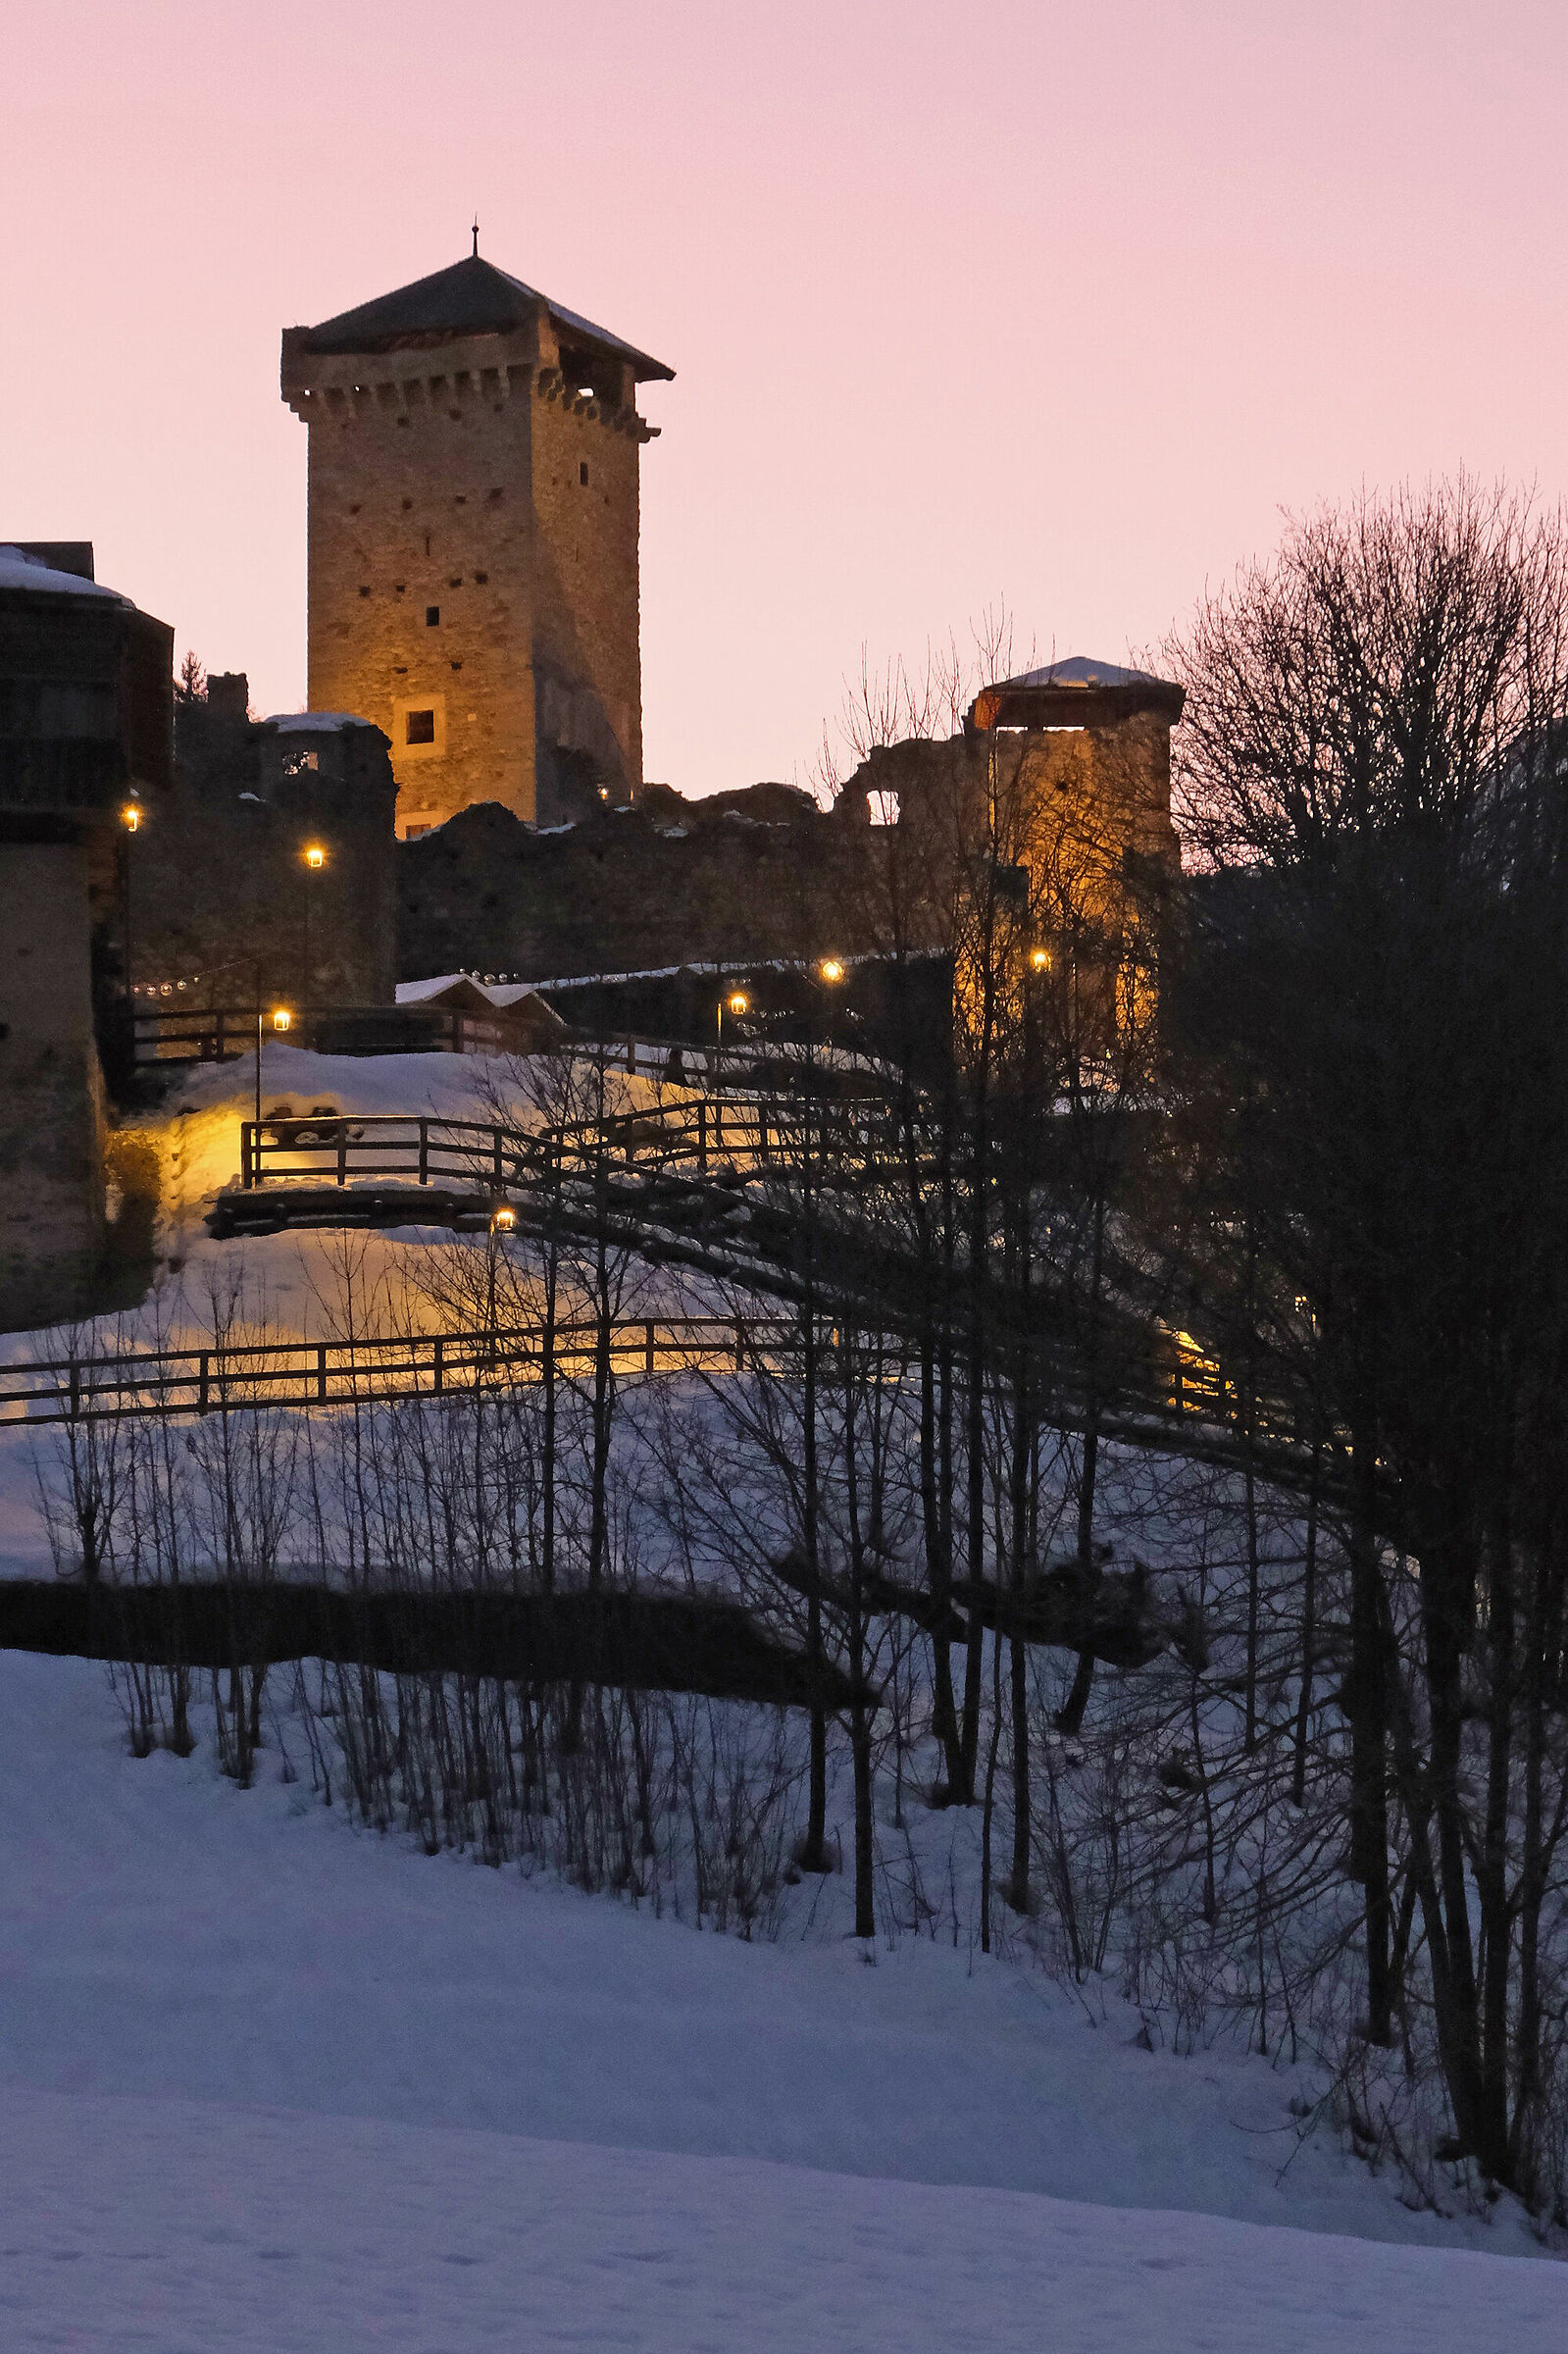 Ossana... the castle, the snow, the night...